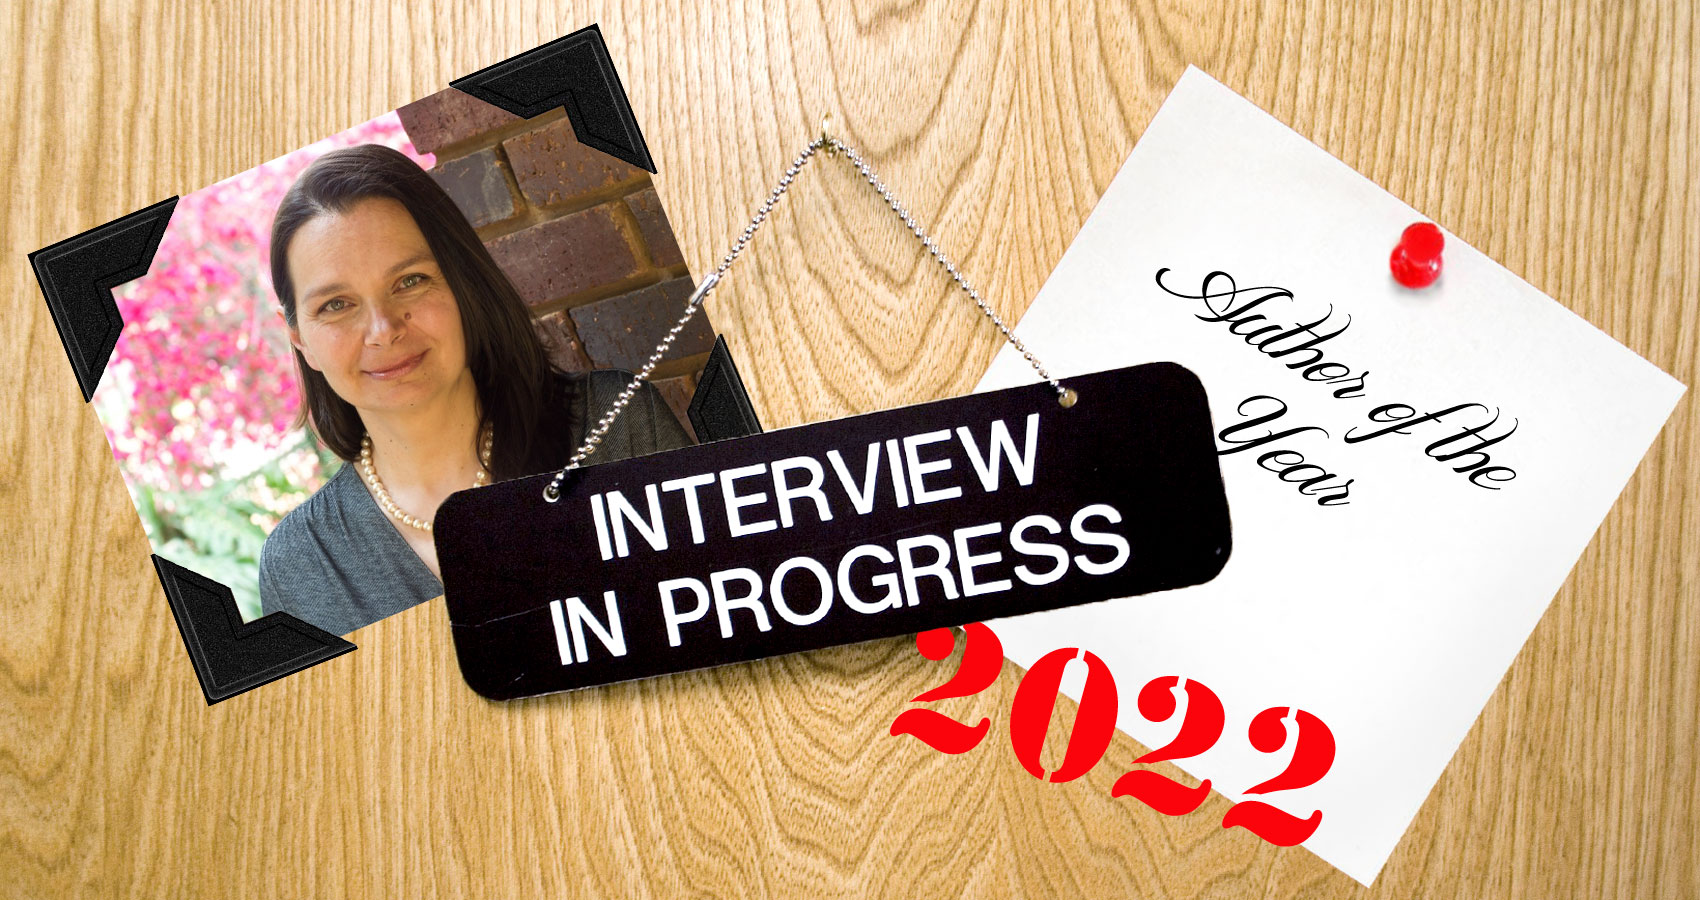 Author Of The Year 2022 Interview with Patricia Furstenberg at Spillwords.com